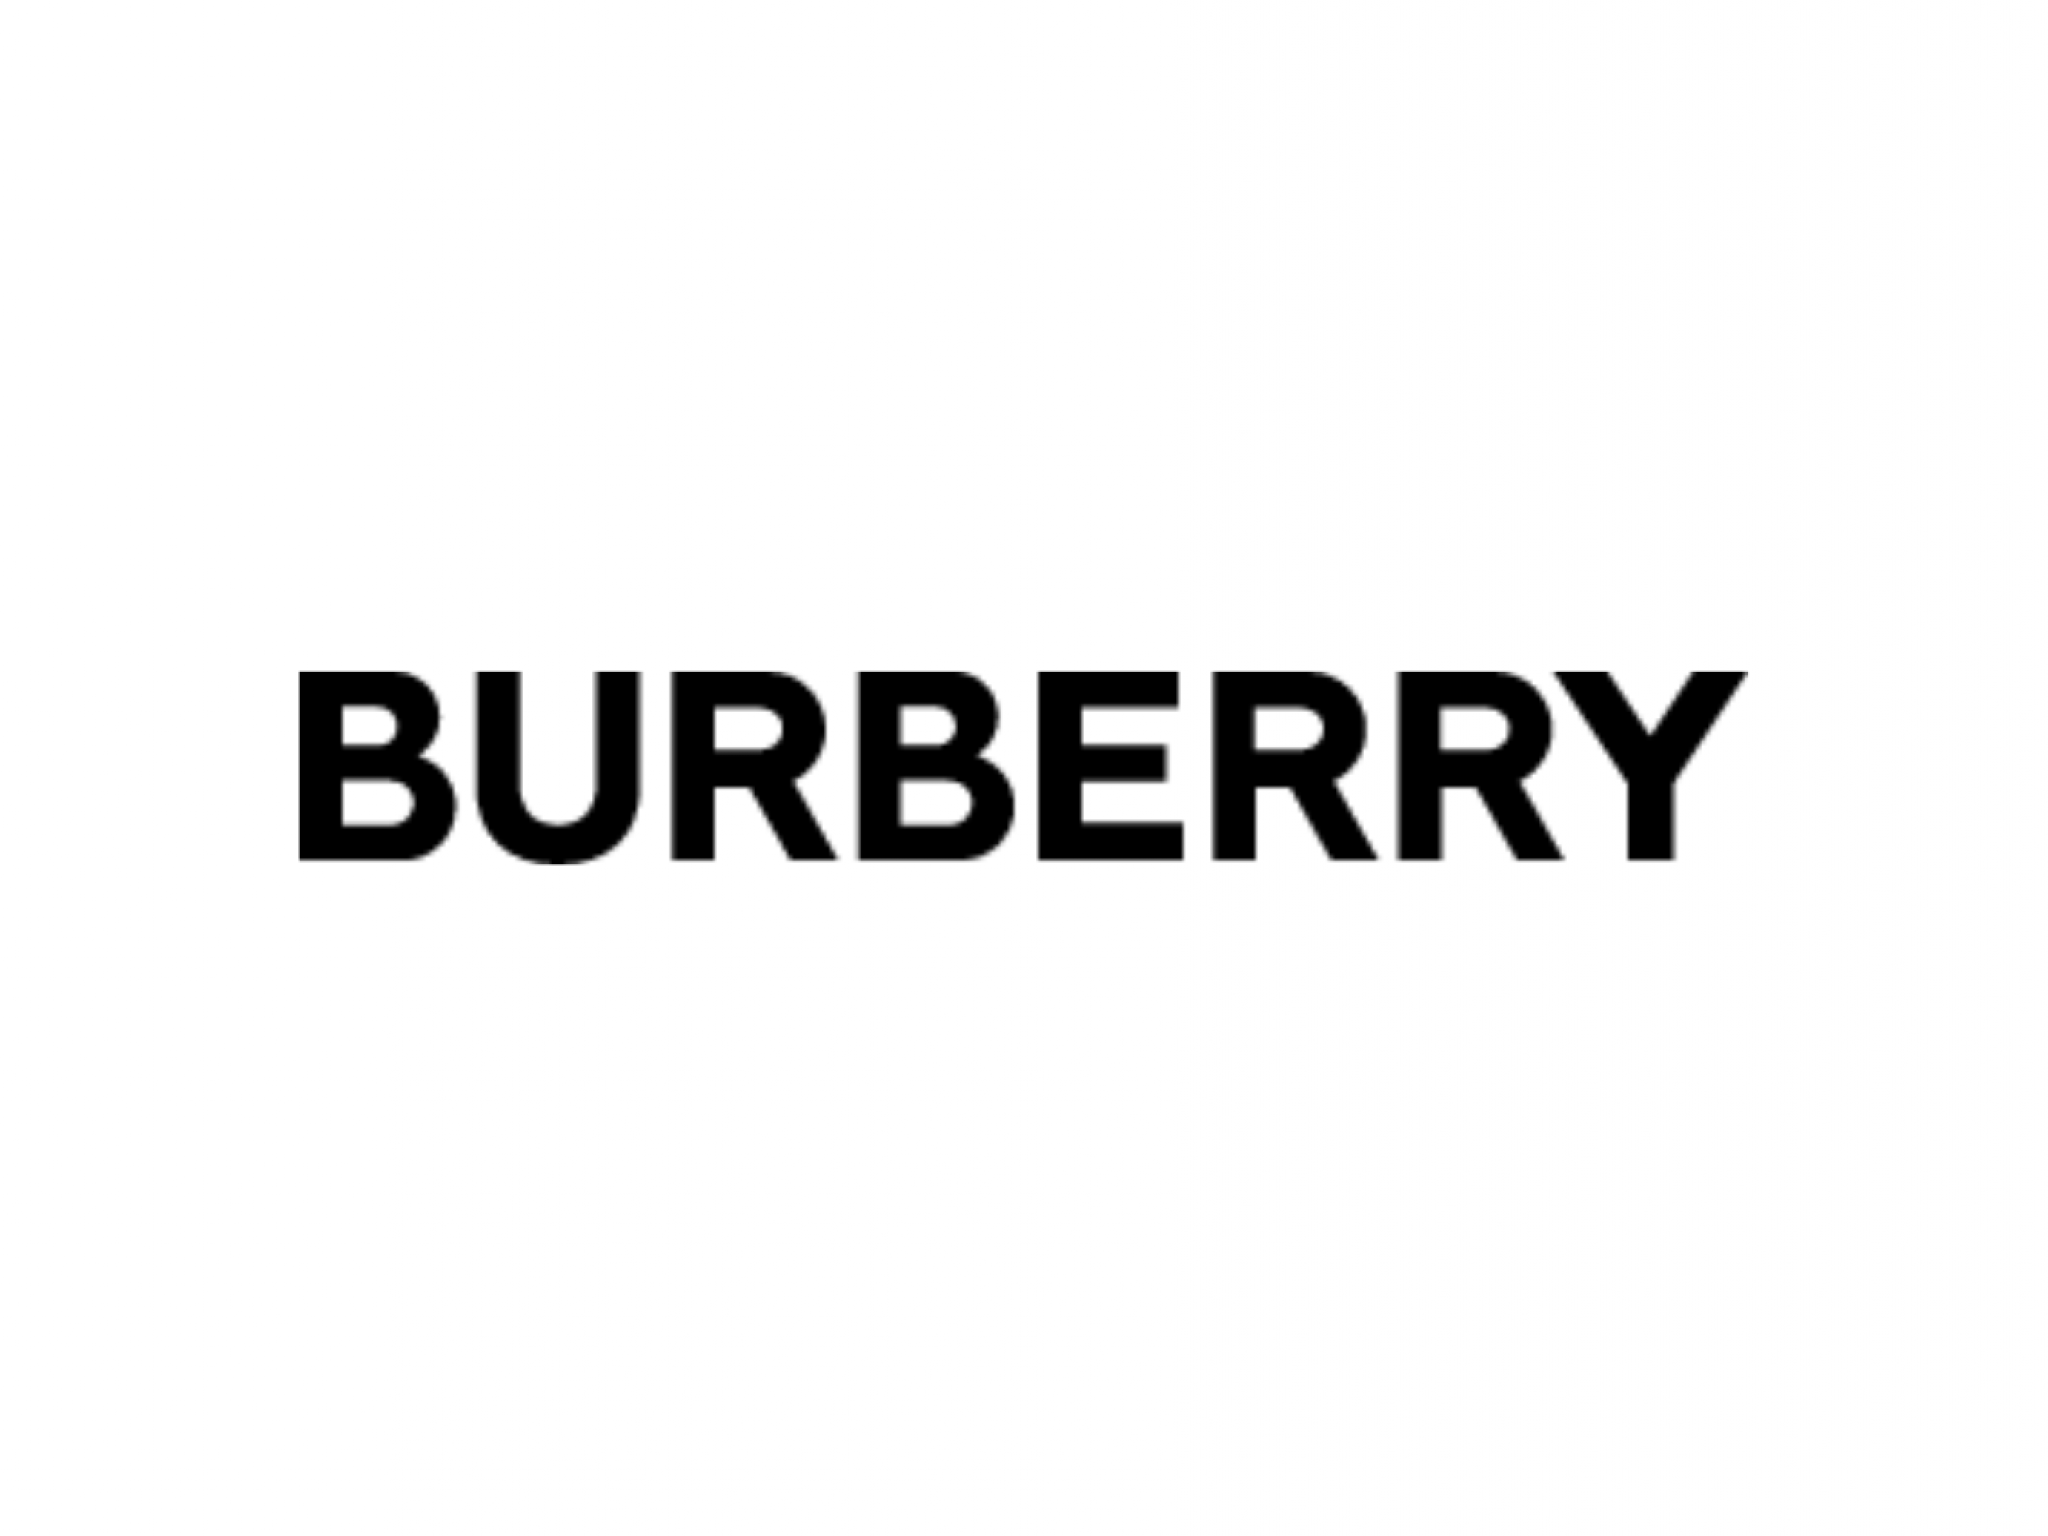  elevating-luxury-burberry-groups-brand-repositioning-amid-robust-demand---analyst-raises-price-target-ahead-of-fy23-earnings 